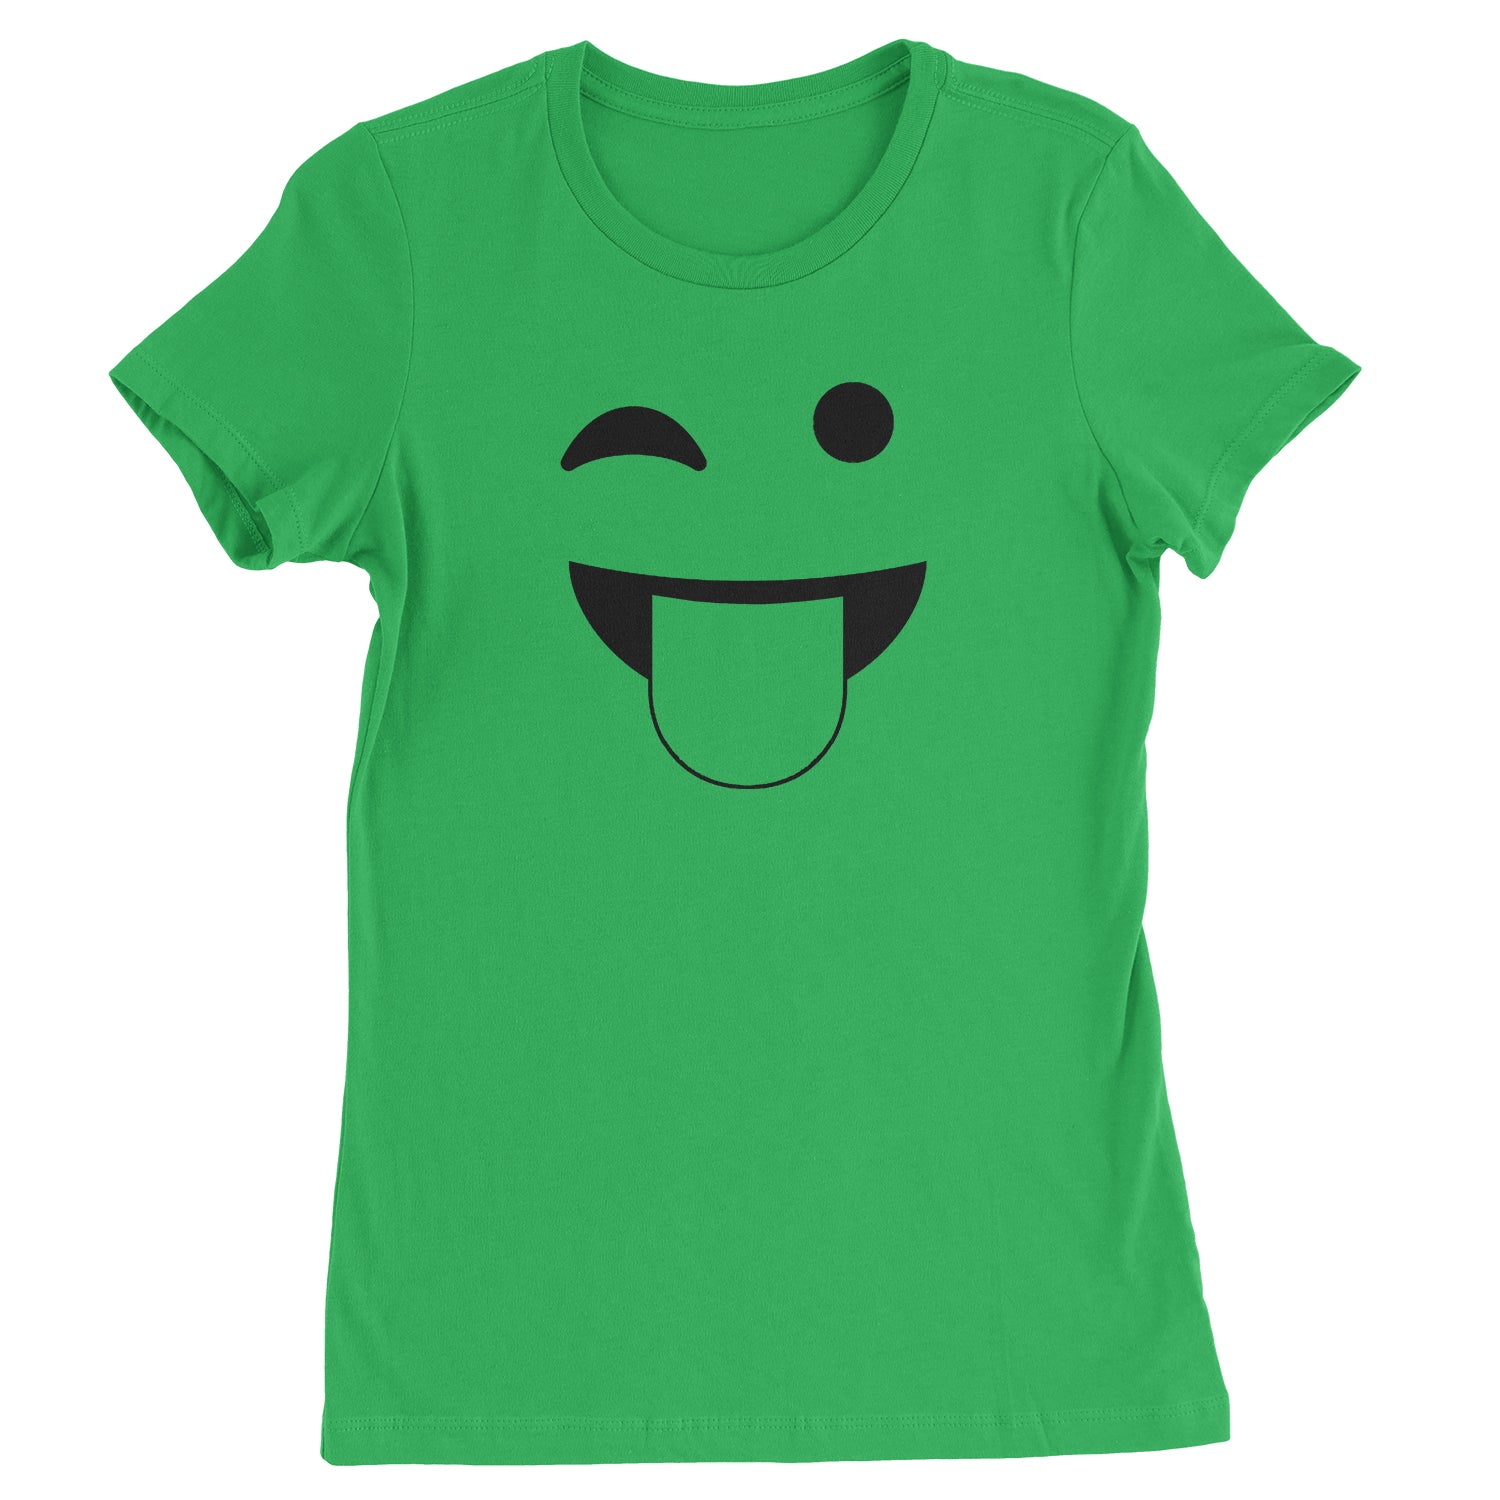 Emoticon Tongue Hanging Out Smile Face Womens T-shirt cosplay, costume, dress, emoji, emote, face, halloween, smiley, up, yellow by Expression Tees